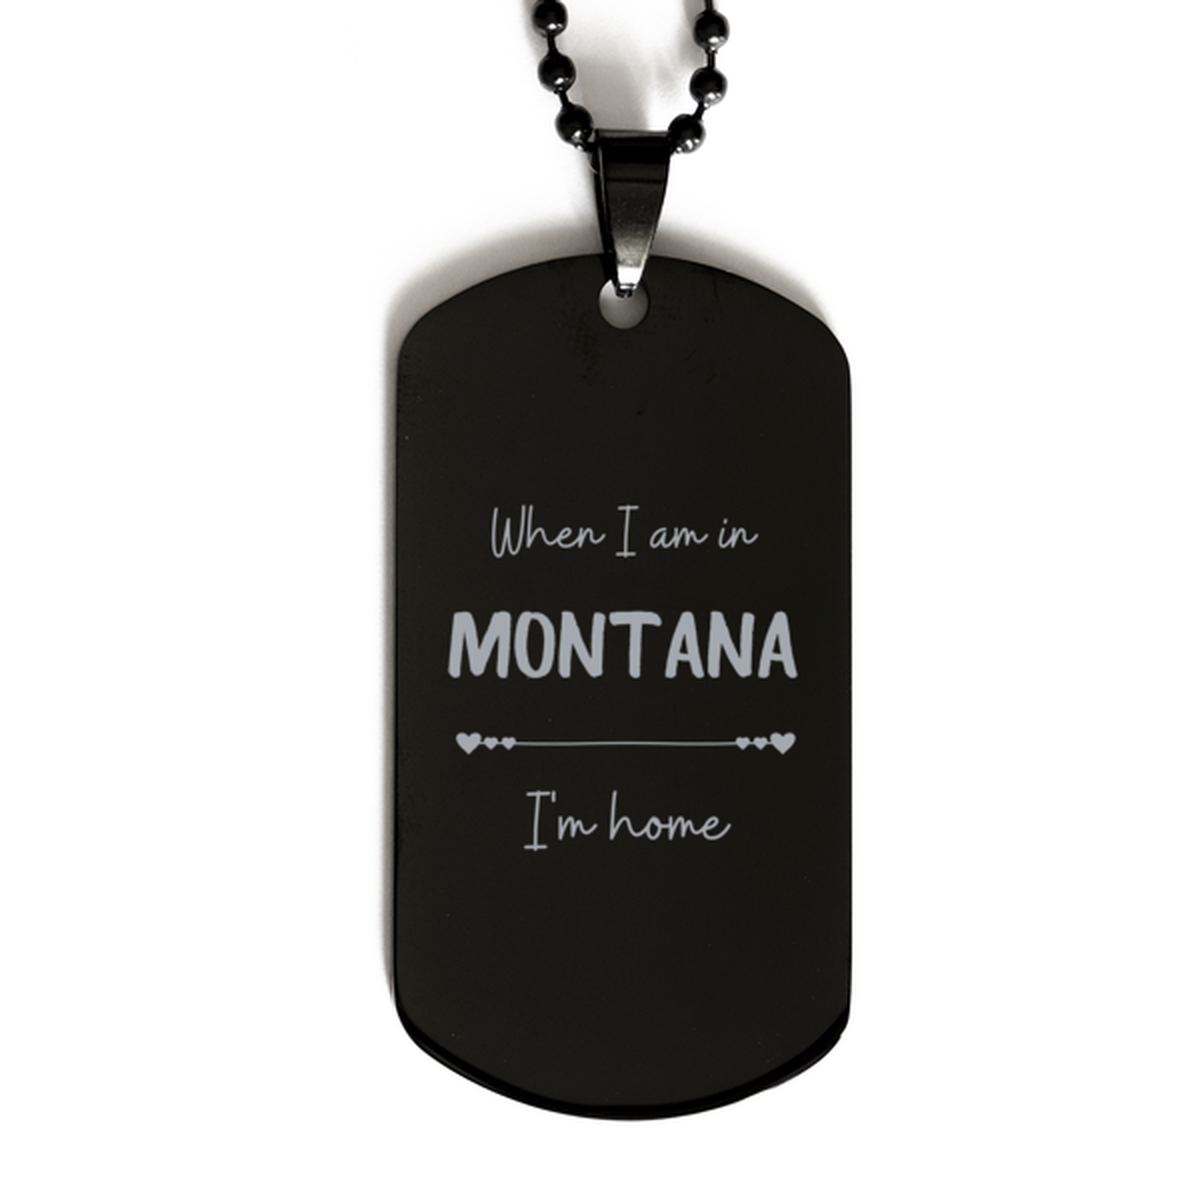 When I am in Montana I'm home Black Dog Tag, Cheap Gifts For Montana, State Montana Birthday Gifts for Friends Coworker